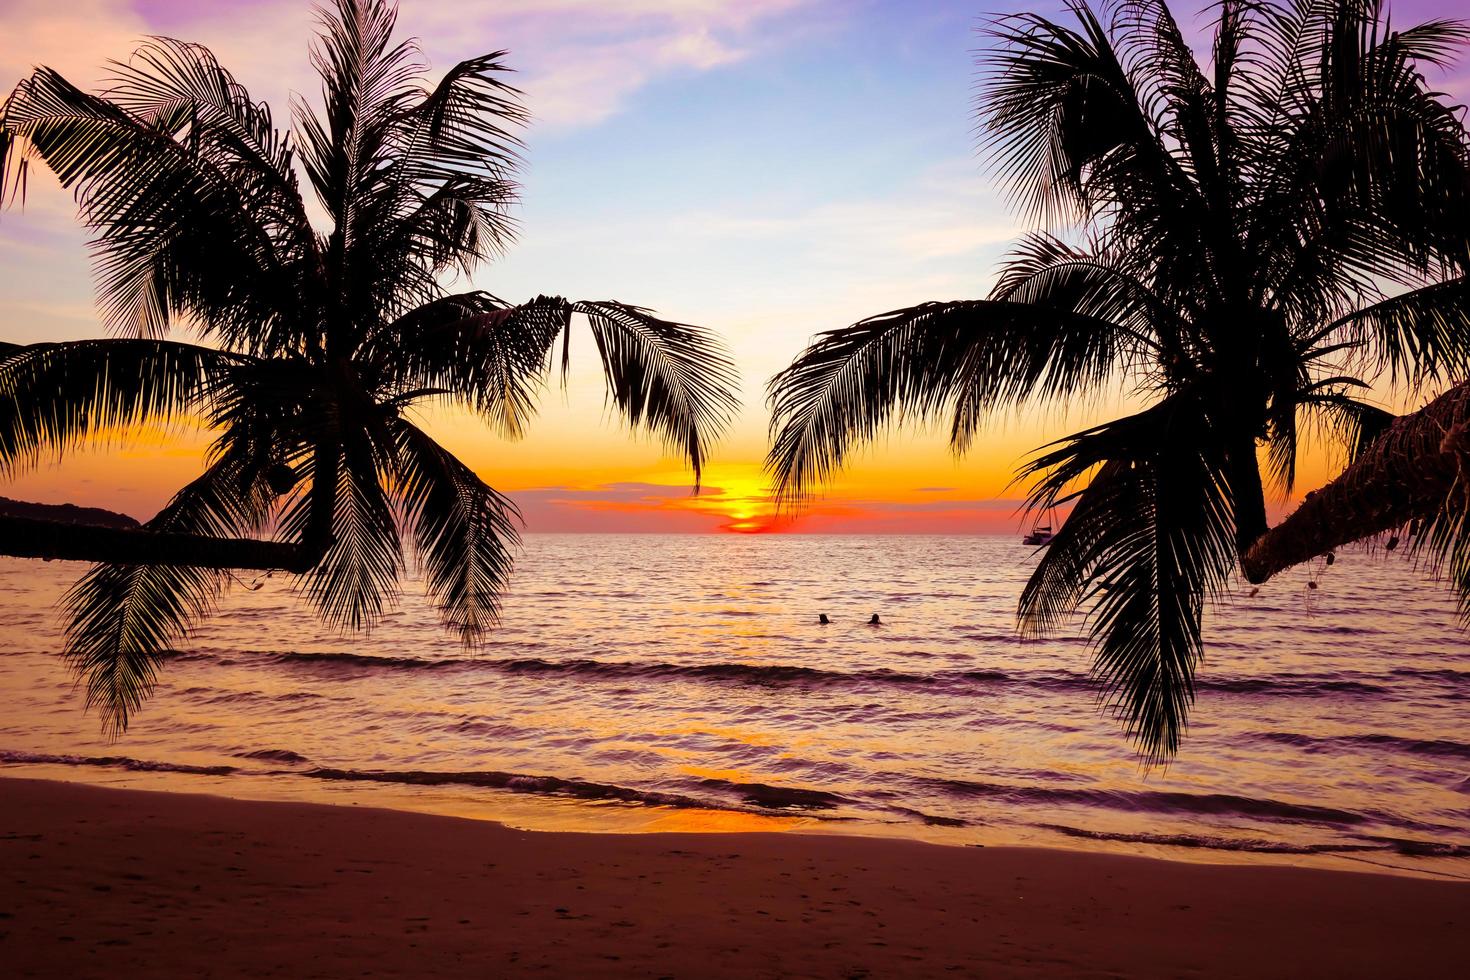 Silhouette of palm trees Beautiful sunset on the tropical sea beach background for travel in holiday relax time, photo